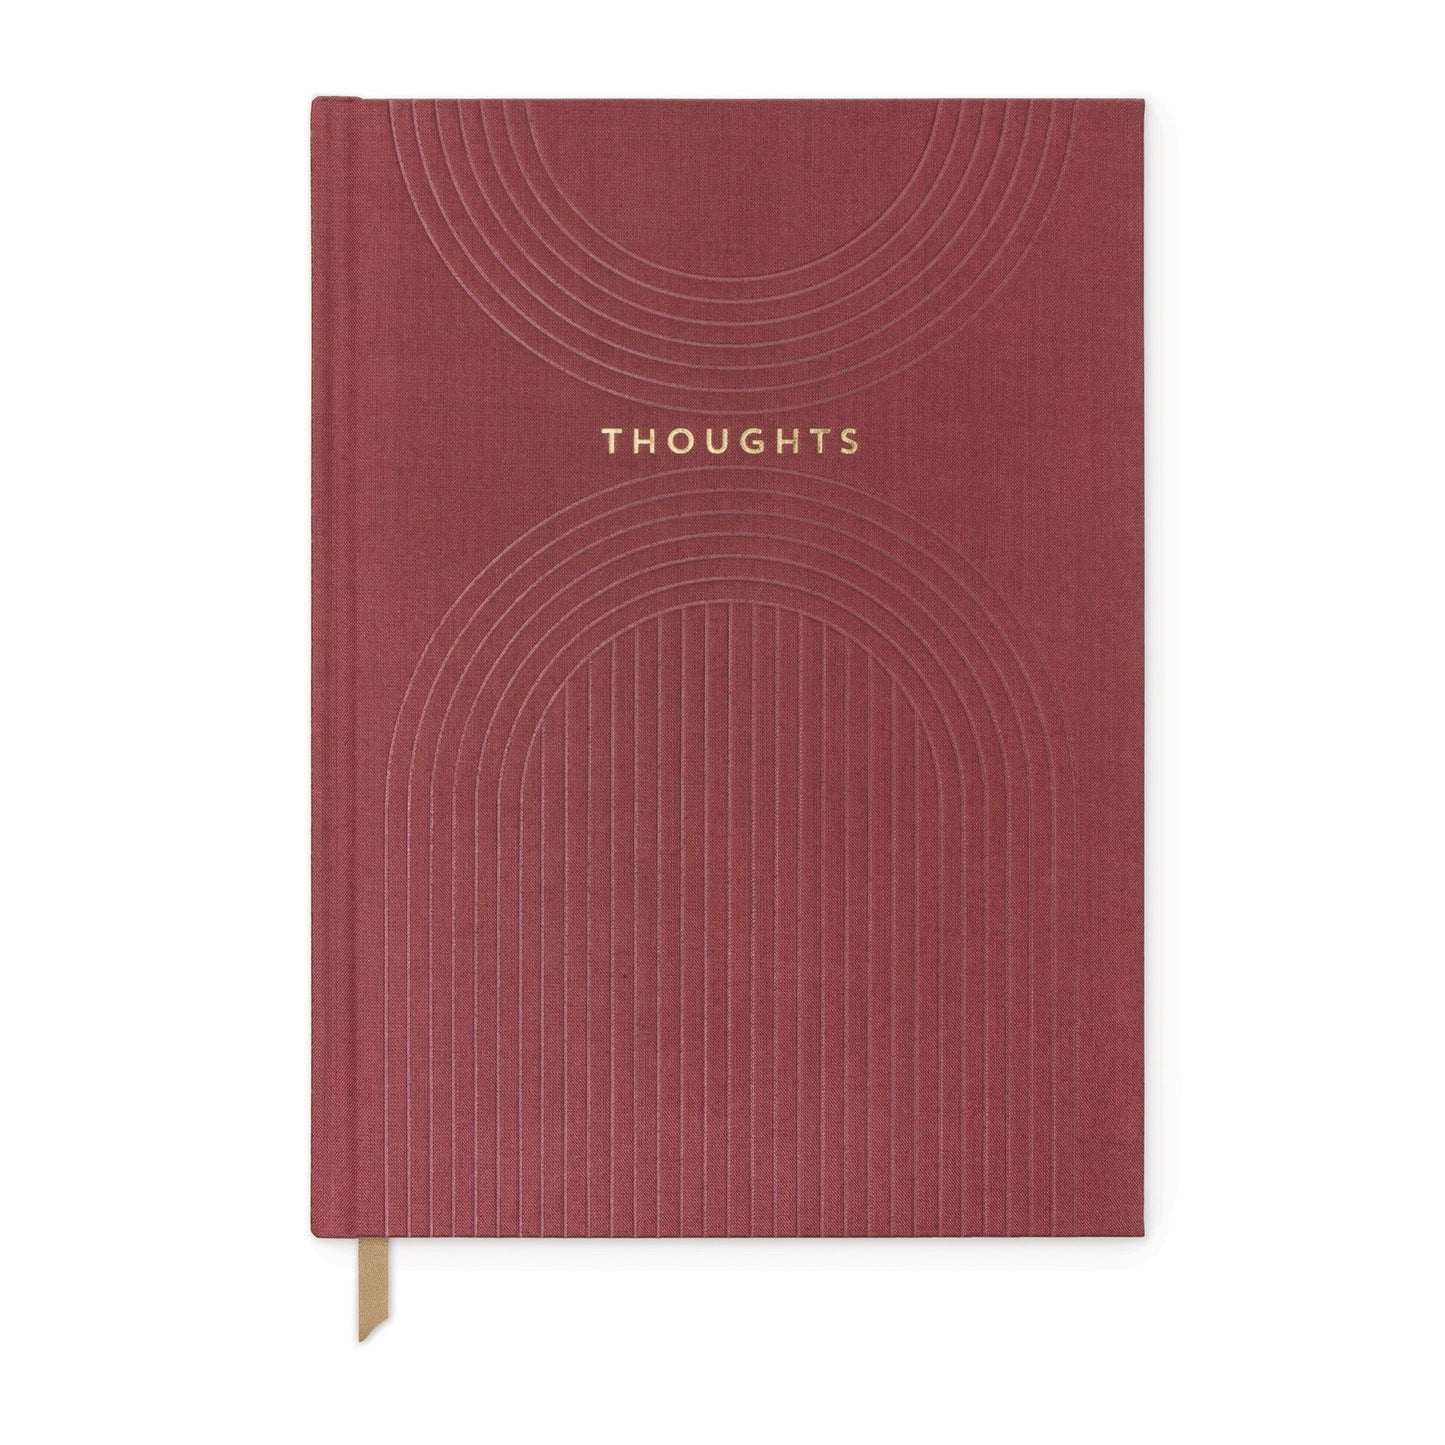 LINEAR CLOTH JOURNAL | BURGUNDY LINEAR CURVES "THOUGHTS"